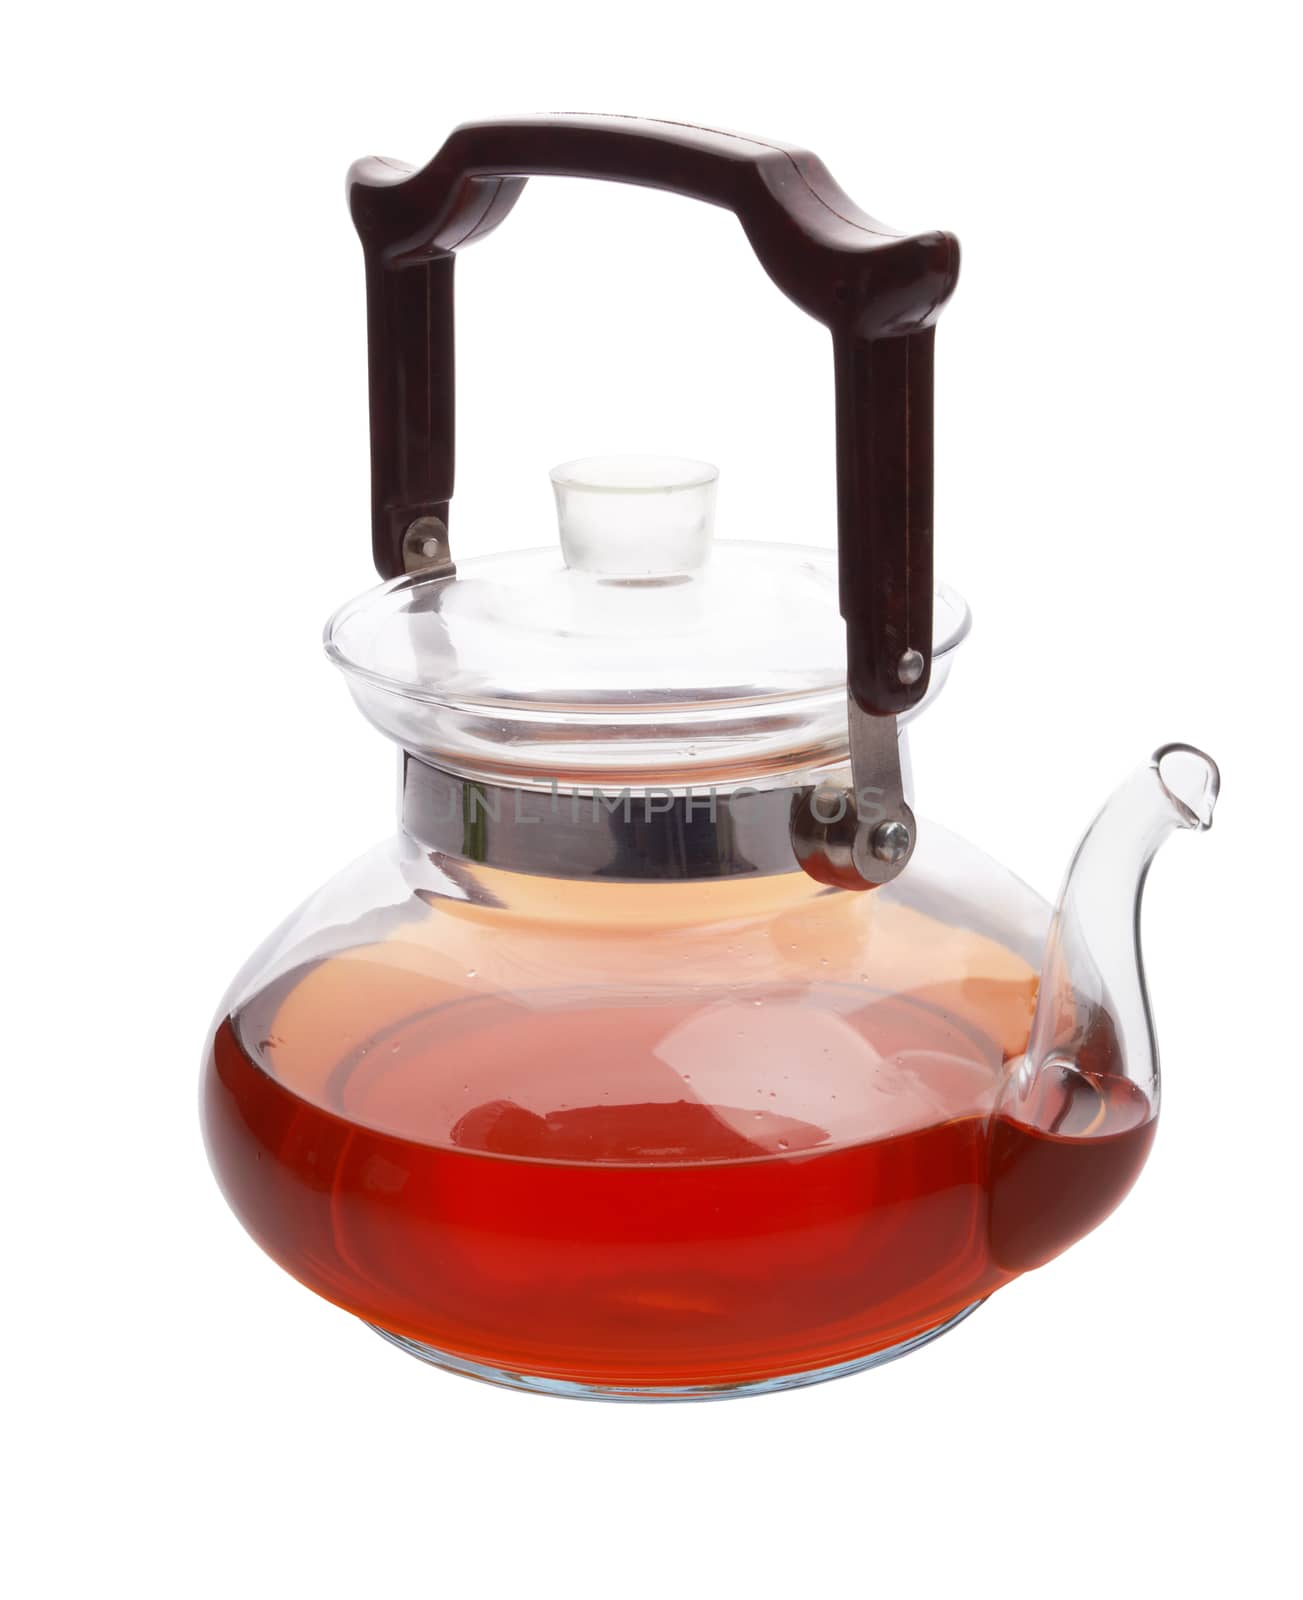 Teapot with tea by pioneer111